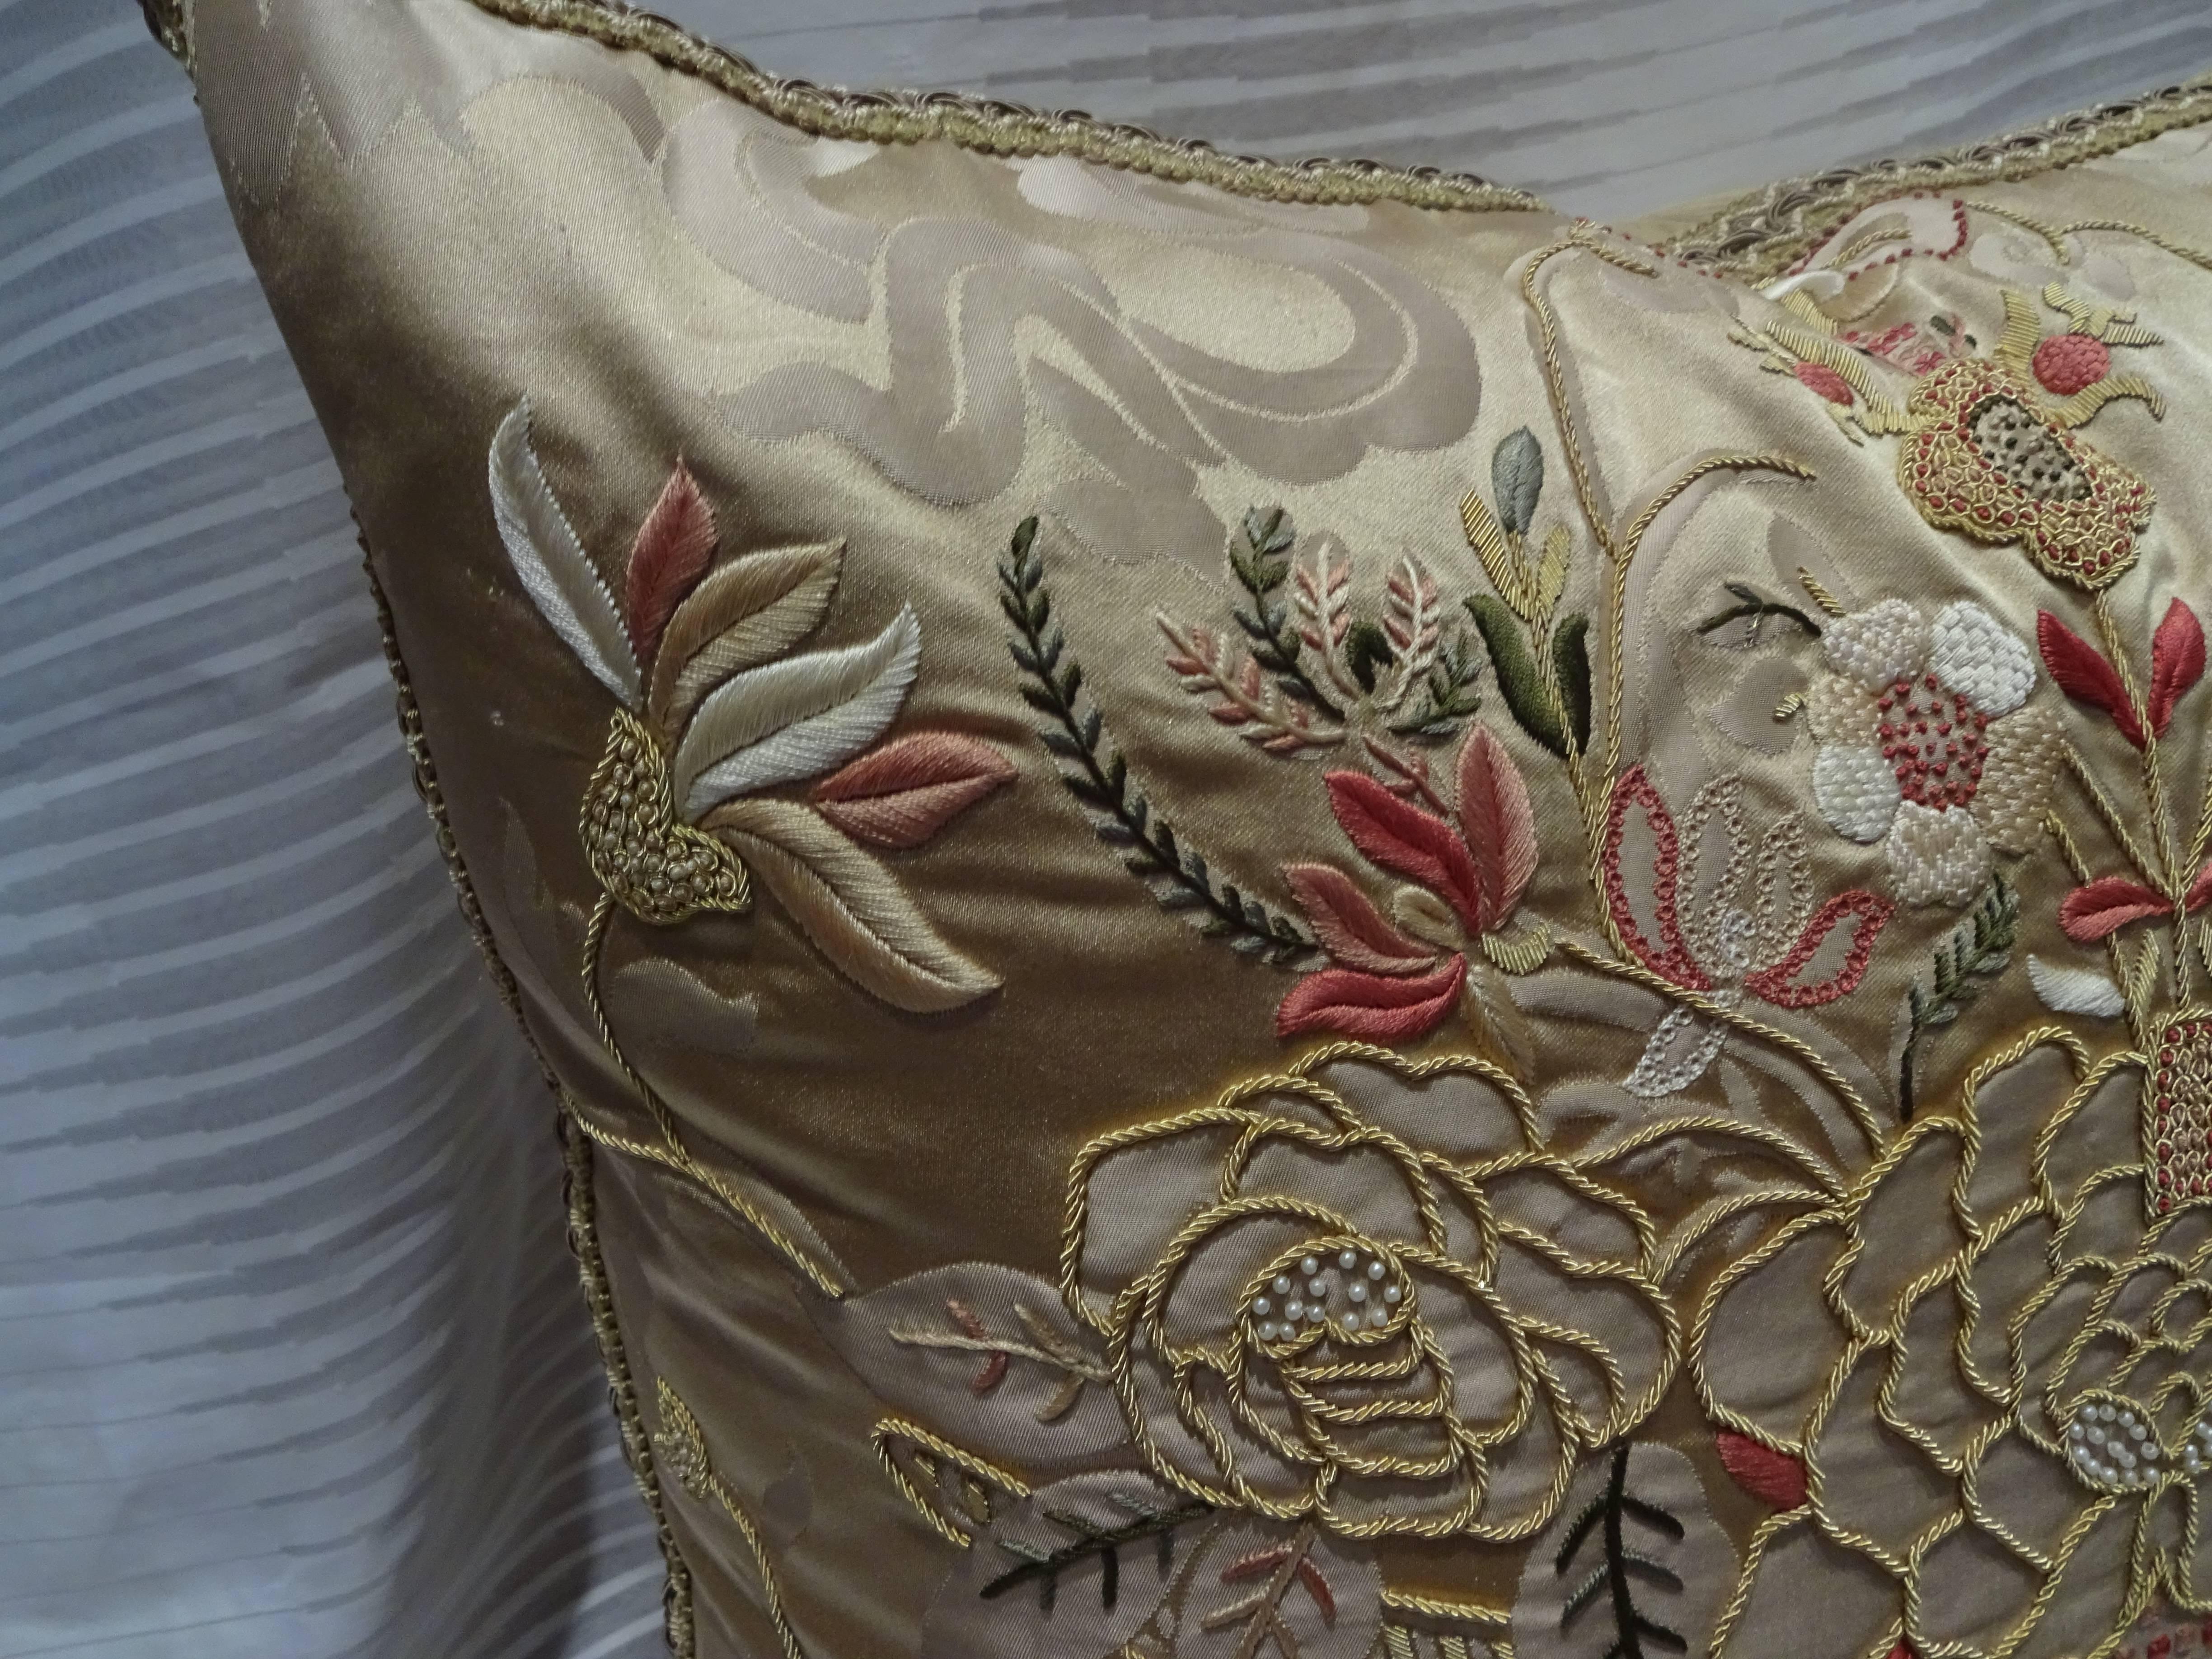 LUXURIOUS EMBROIDERED PILLOW - HONEY COLOR.
Scalamandre fabric Front, Multi Color Embroidery over Honey Silk Damask.
Heavy silk twill fabric Back.
Large embroidered braid trimming.
Size : 22